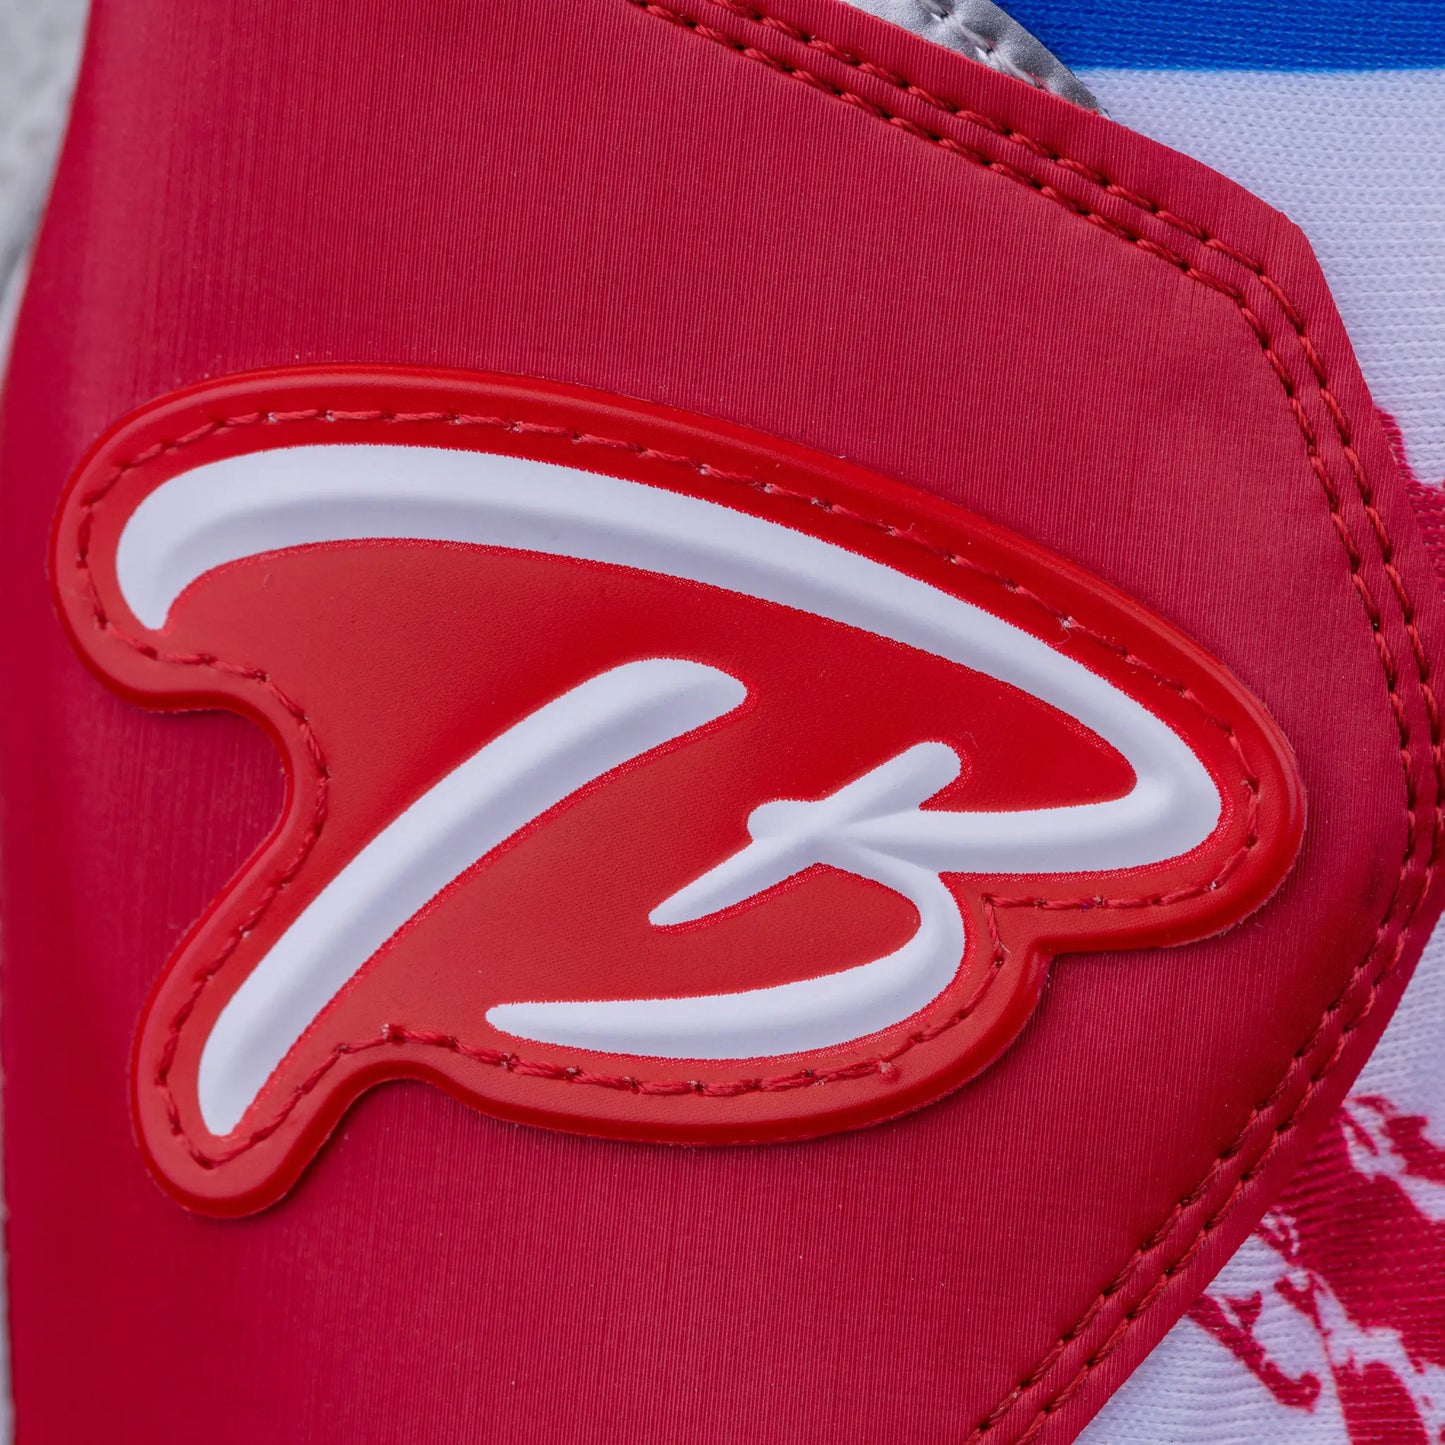 Close-up of the embossed 'TB' logo on red leather, part of Tater Baseball's premium batting gloves with a design inspired by the Puerto Rican flag.